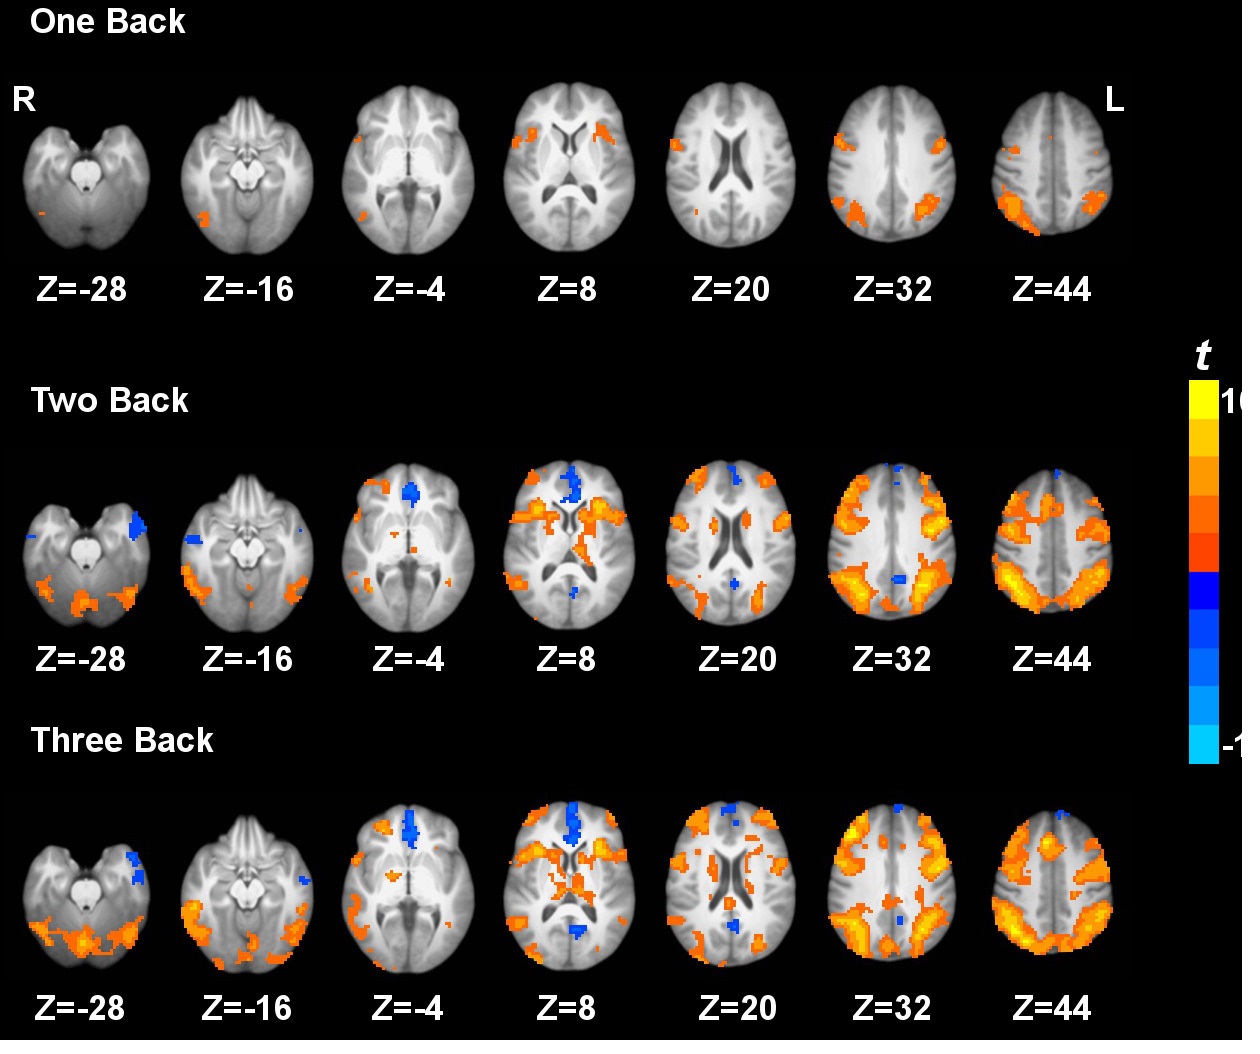 Paired t-maps between the three active working memory task conditions and the 0 back baseline vigilance task condition based on quantified CBF. p < 0.05 corrected. ‘L’ denotes the left hemisphere of the brain and ‘R’ denotes the right hemisphere.